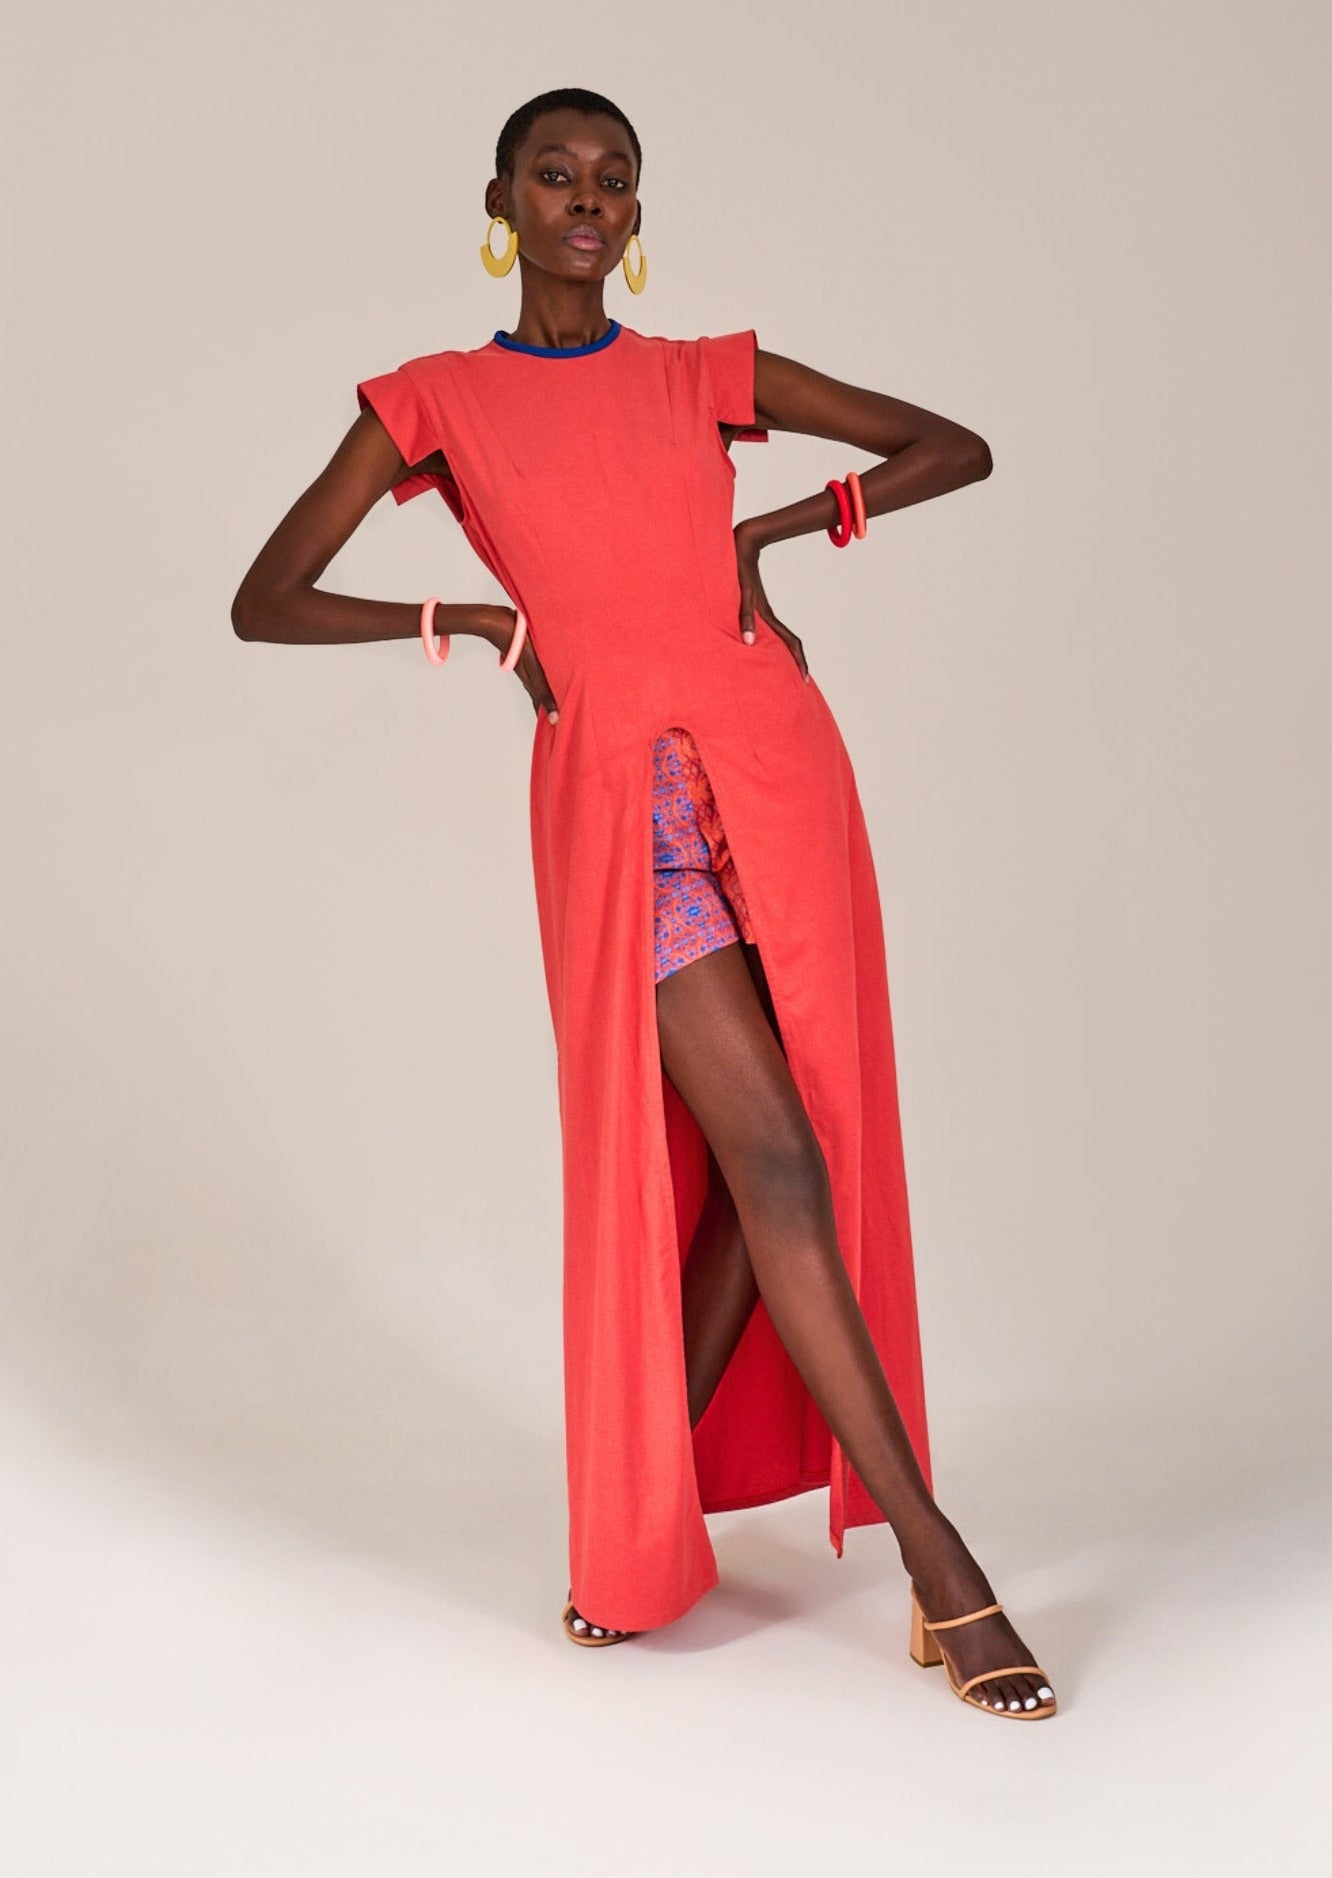 Model wearing the KAHINDO Franshook Long Tunic with hands on waist